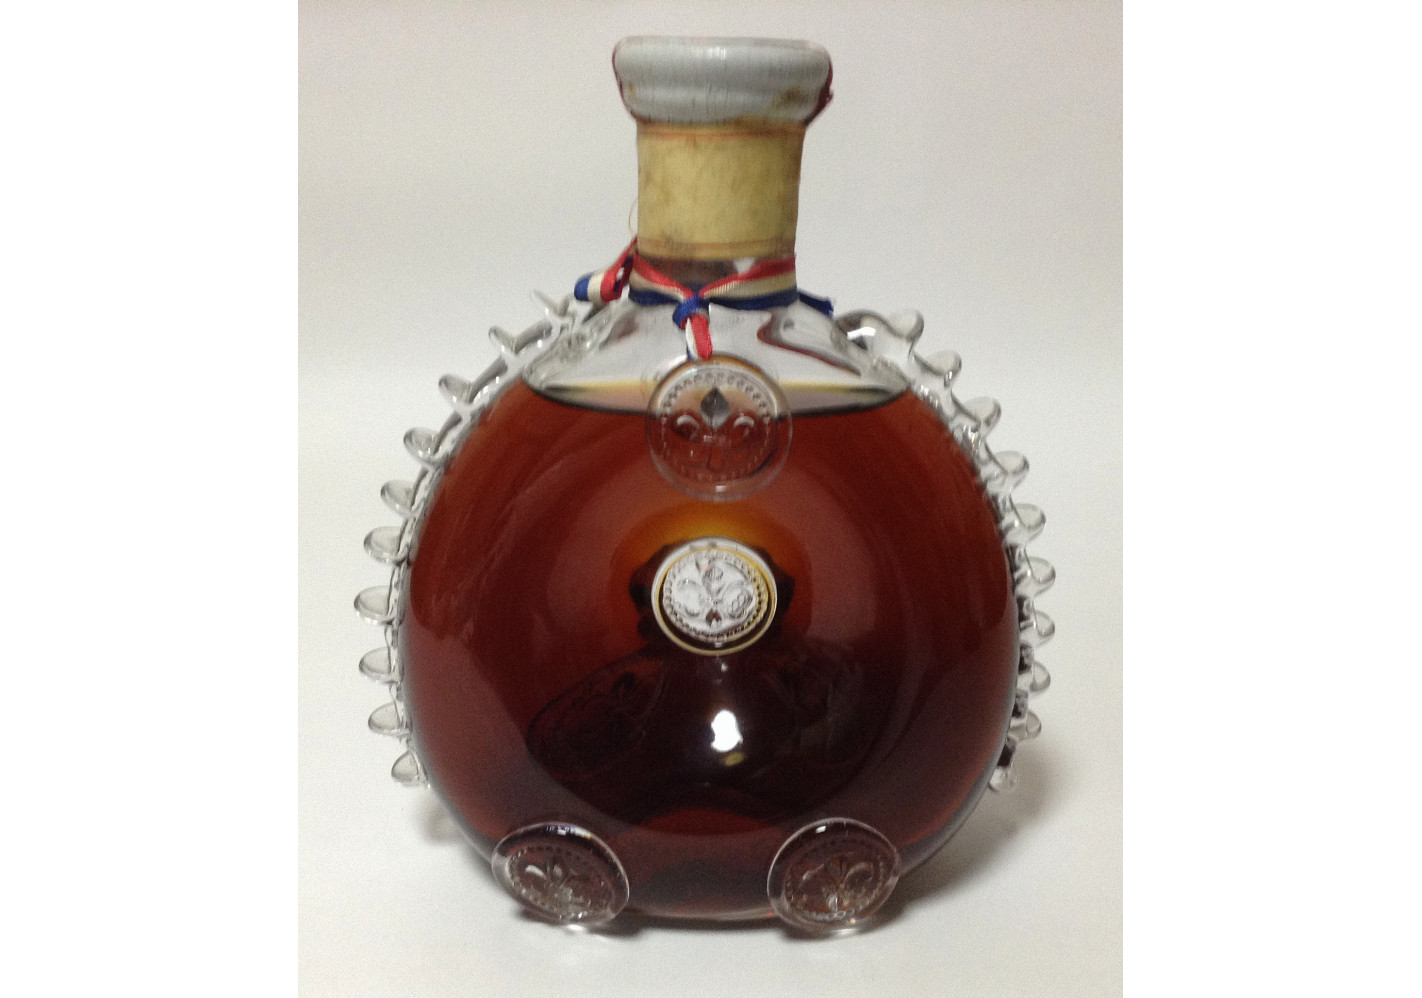 At Auction: An empty Louis XIII Remy Martin Grand Champagne Cognac bottle  (H:28cm)